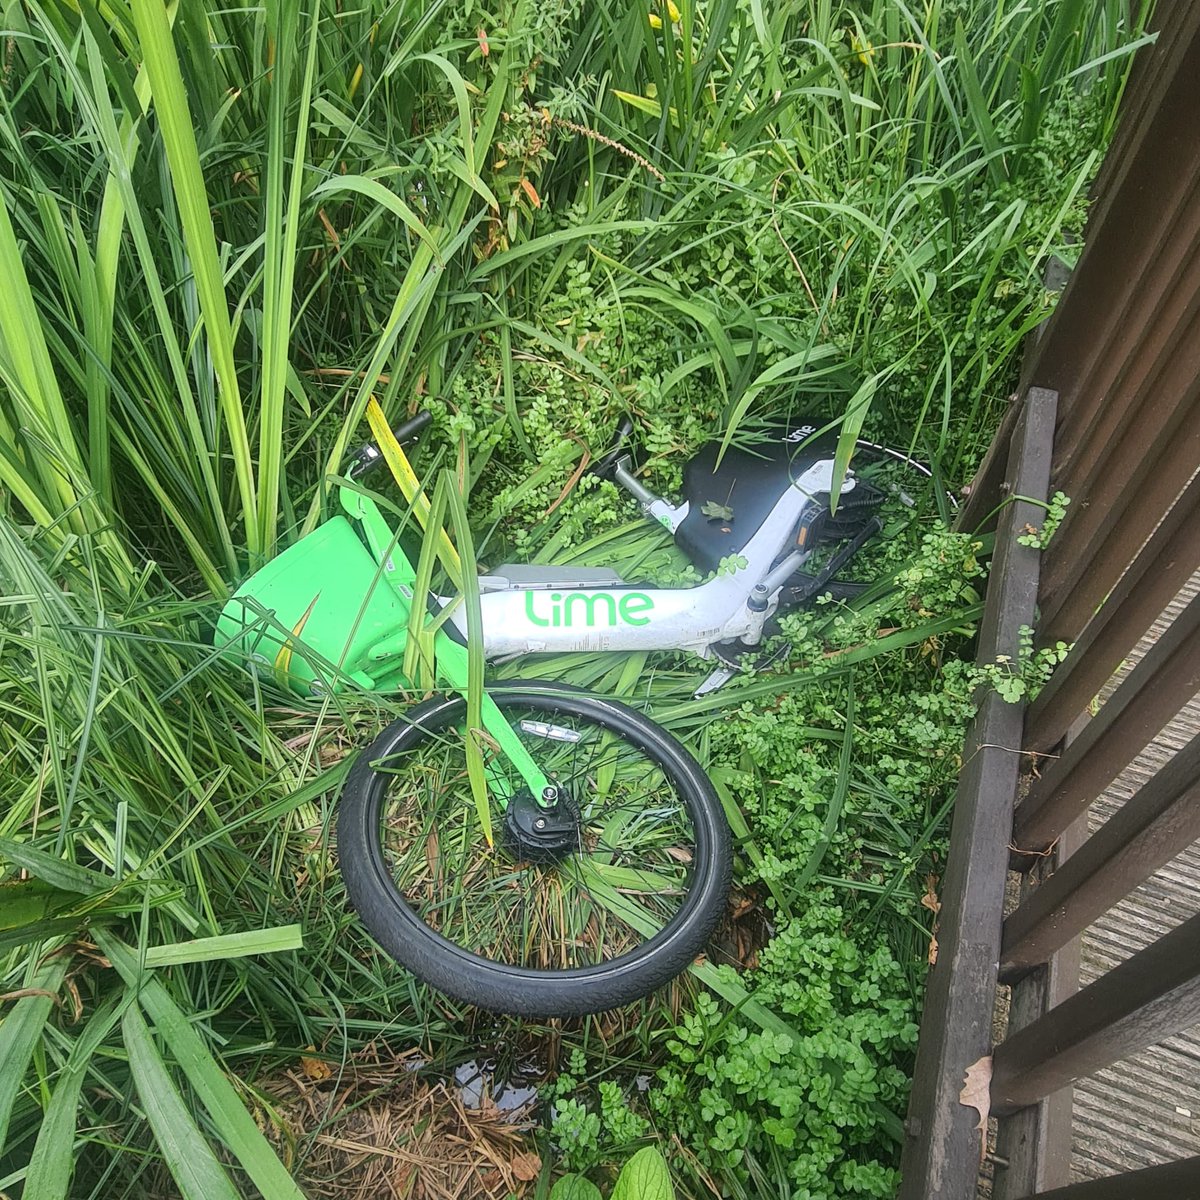 This isn't how you grow limes. Please don't attempt to plant your bikes at #WaterlooGreen. This is an award-winning community park - please show it some love 💚  @limebike